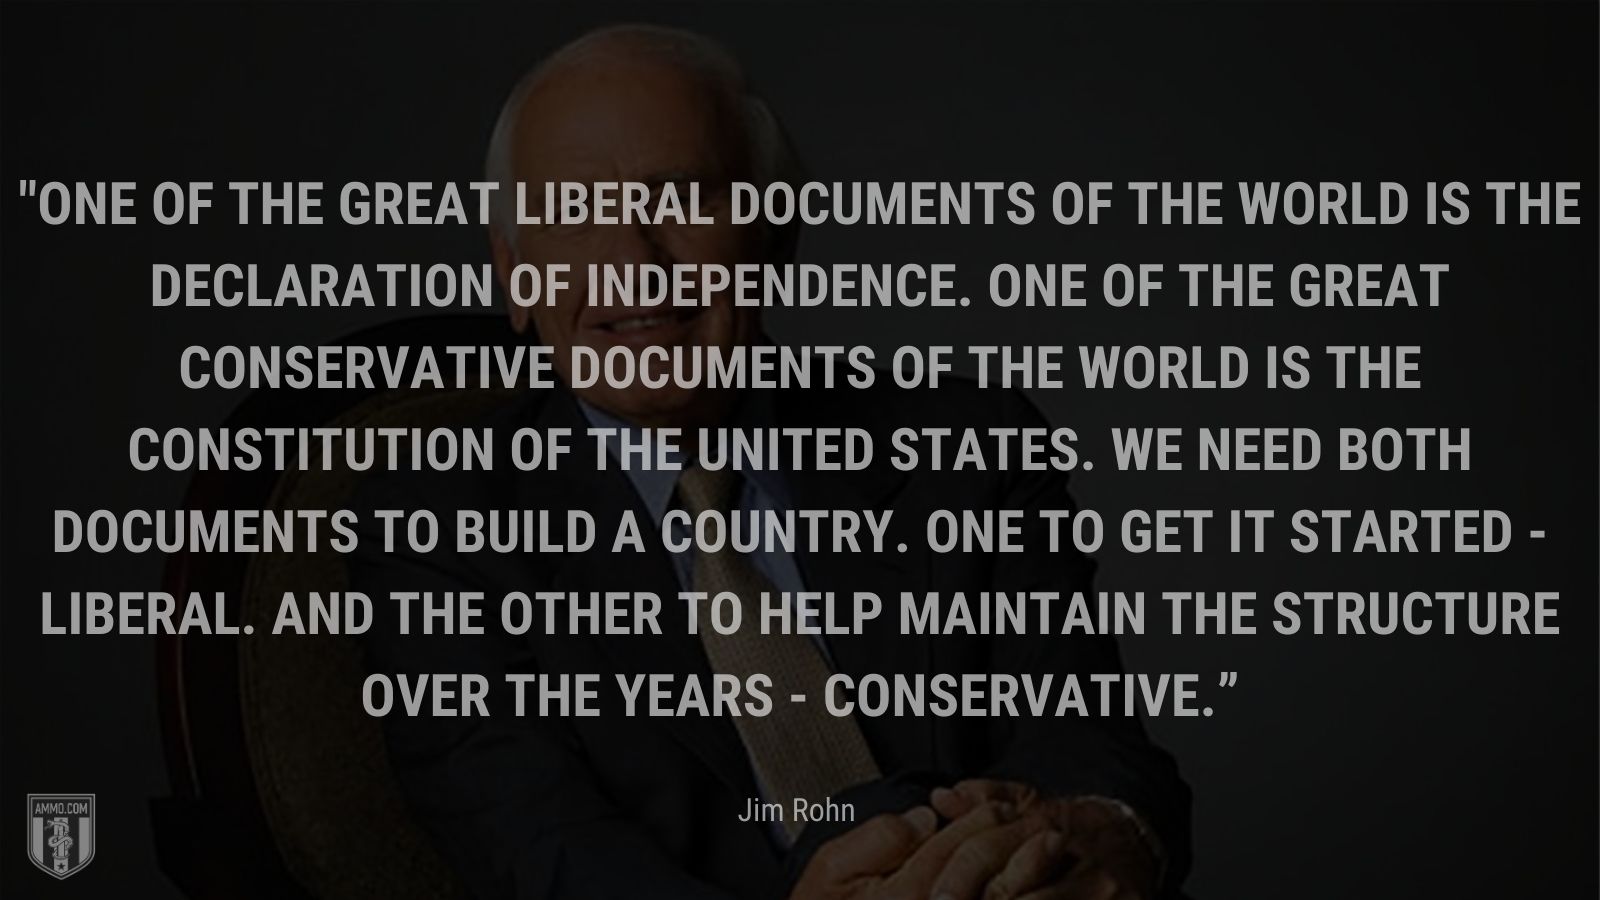 “One of the great liberal documents of the world is the Declaration of Independence. One of the great conservative documents of the world is the Constitution of the United States. We need both documents to build a country. One to get it started - liberal. And the other to help maintain the structure over the years - conservative.” - Jim Rohn